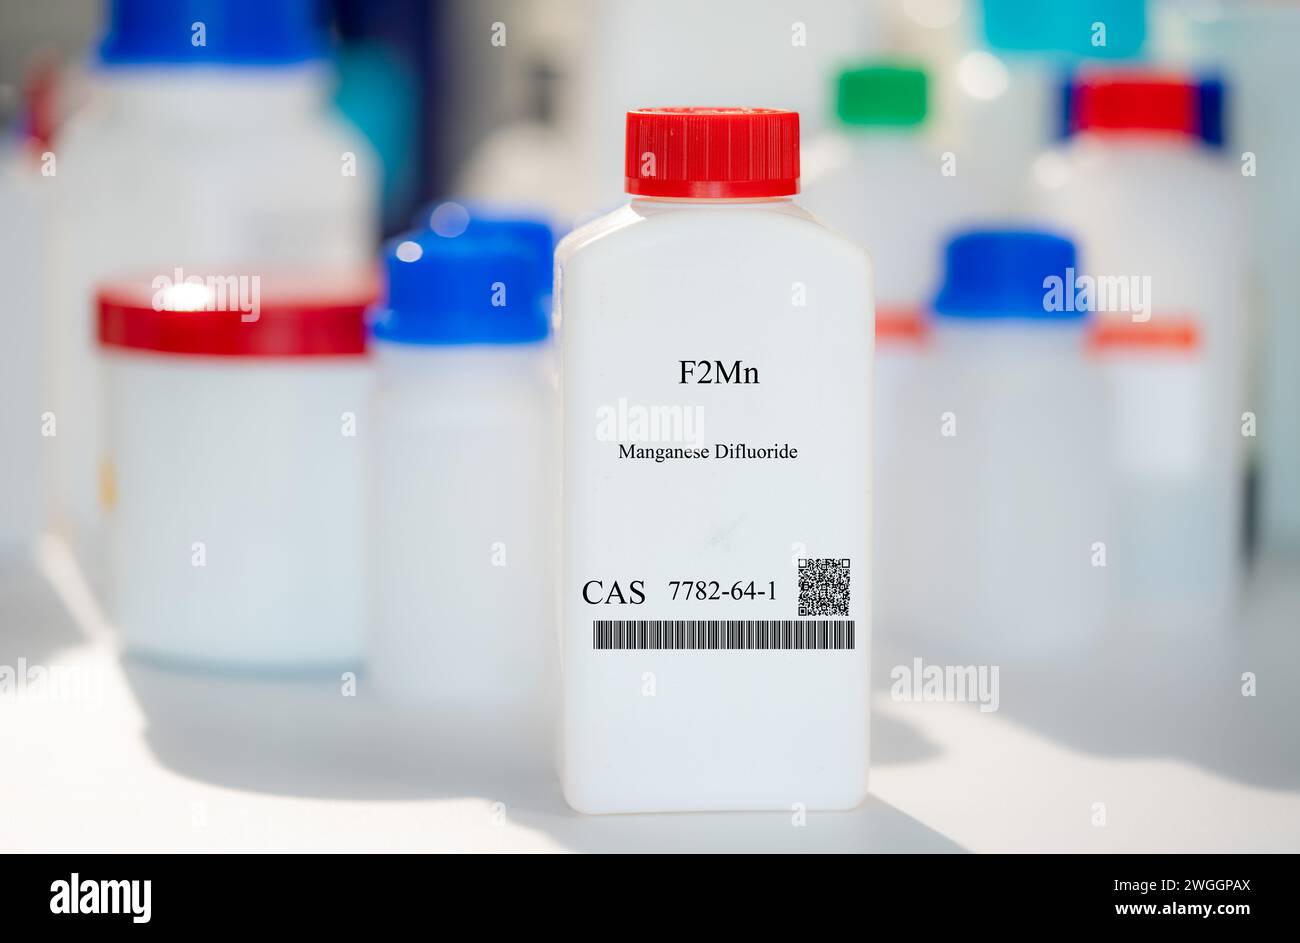 F2Mn manganese difluoride CAS 7782-64-1 chemical substance in white plastic laboratory packaging Stock Photo